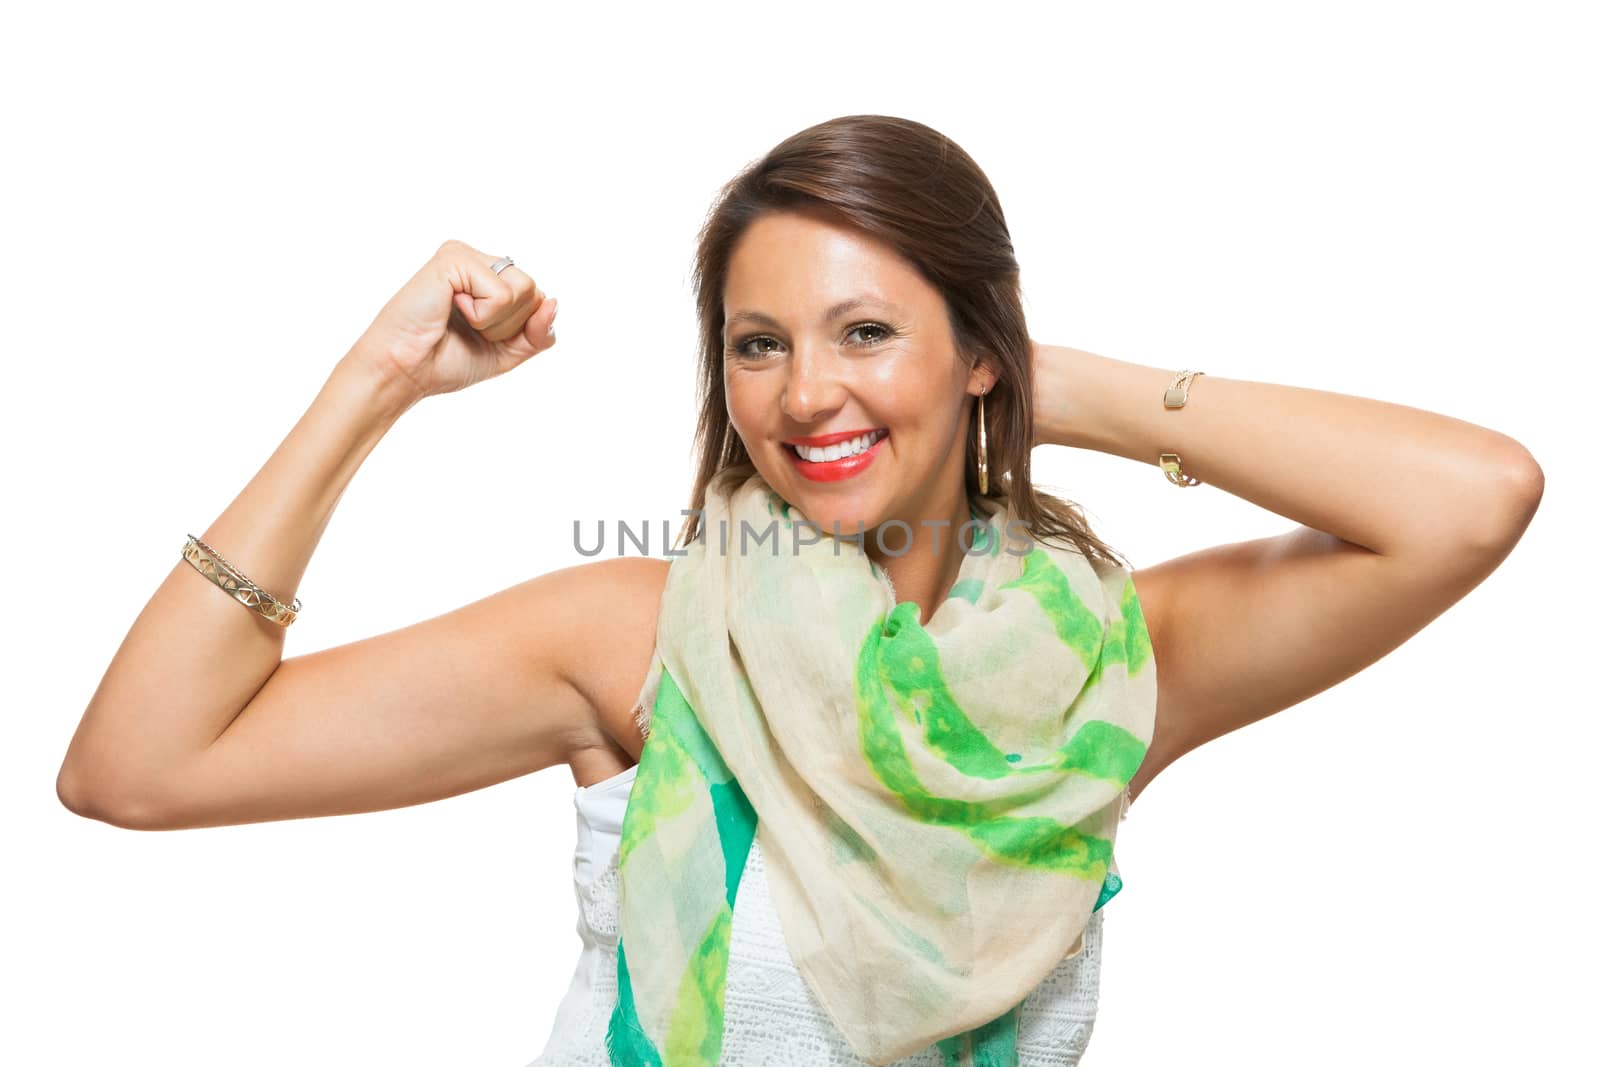 Close up Pretty Young Woman in Trendy Outfit, Showing her Arm Muscles While Holding Back Hair and Looking at the Camera. Isolated on White Background.